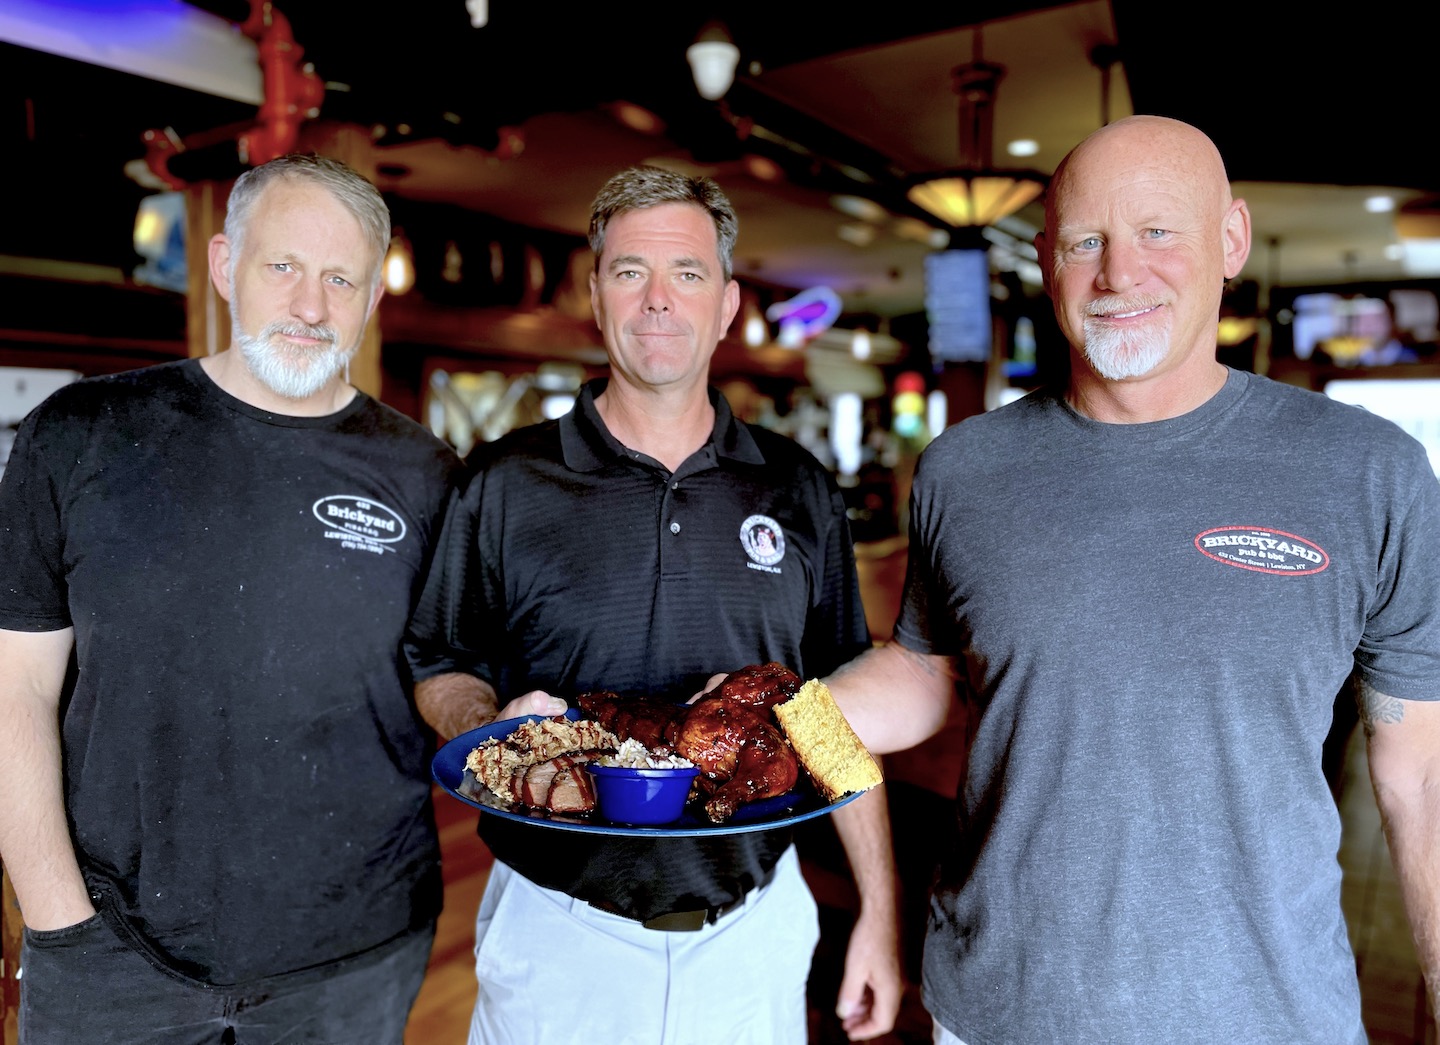 Pictured at the Brickyard Pub & BBQ are, from left, Steve Matthews, Ken Bryan and Eric Matthews. Bryan is holding `The Ultimate` platter, which includes a heaping mound of pulled pork, succulent half-rack of St. Louis-style ribs, tender brisket and a savory barbecued half-chicken. Served with two sides and cornbread, this mound of food is enough to feed a couple for a full week.